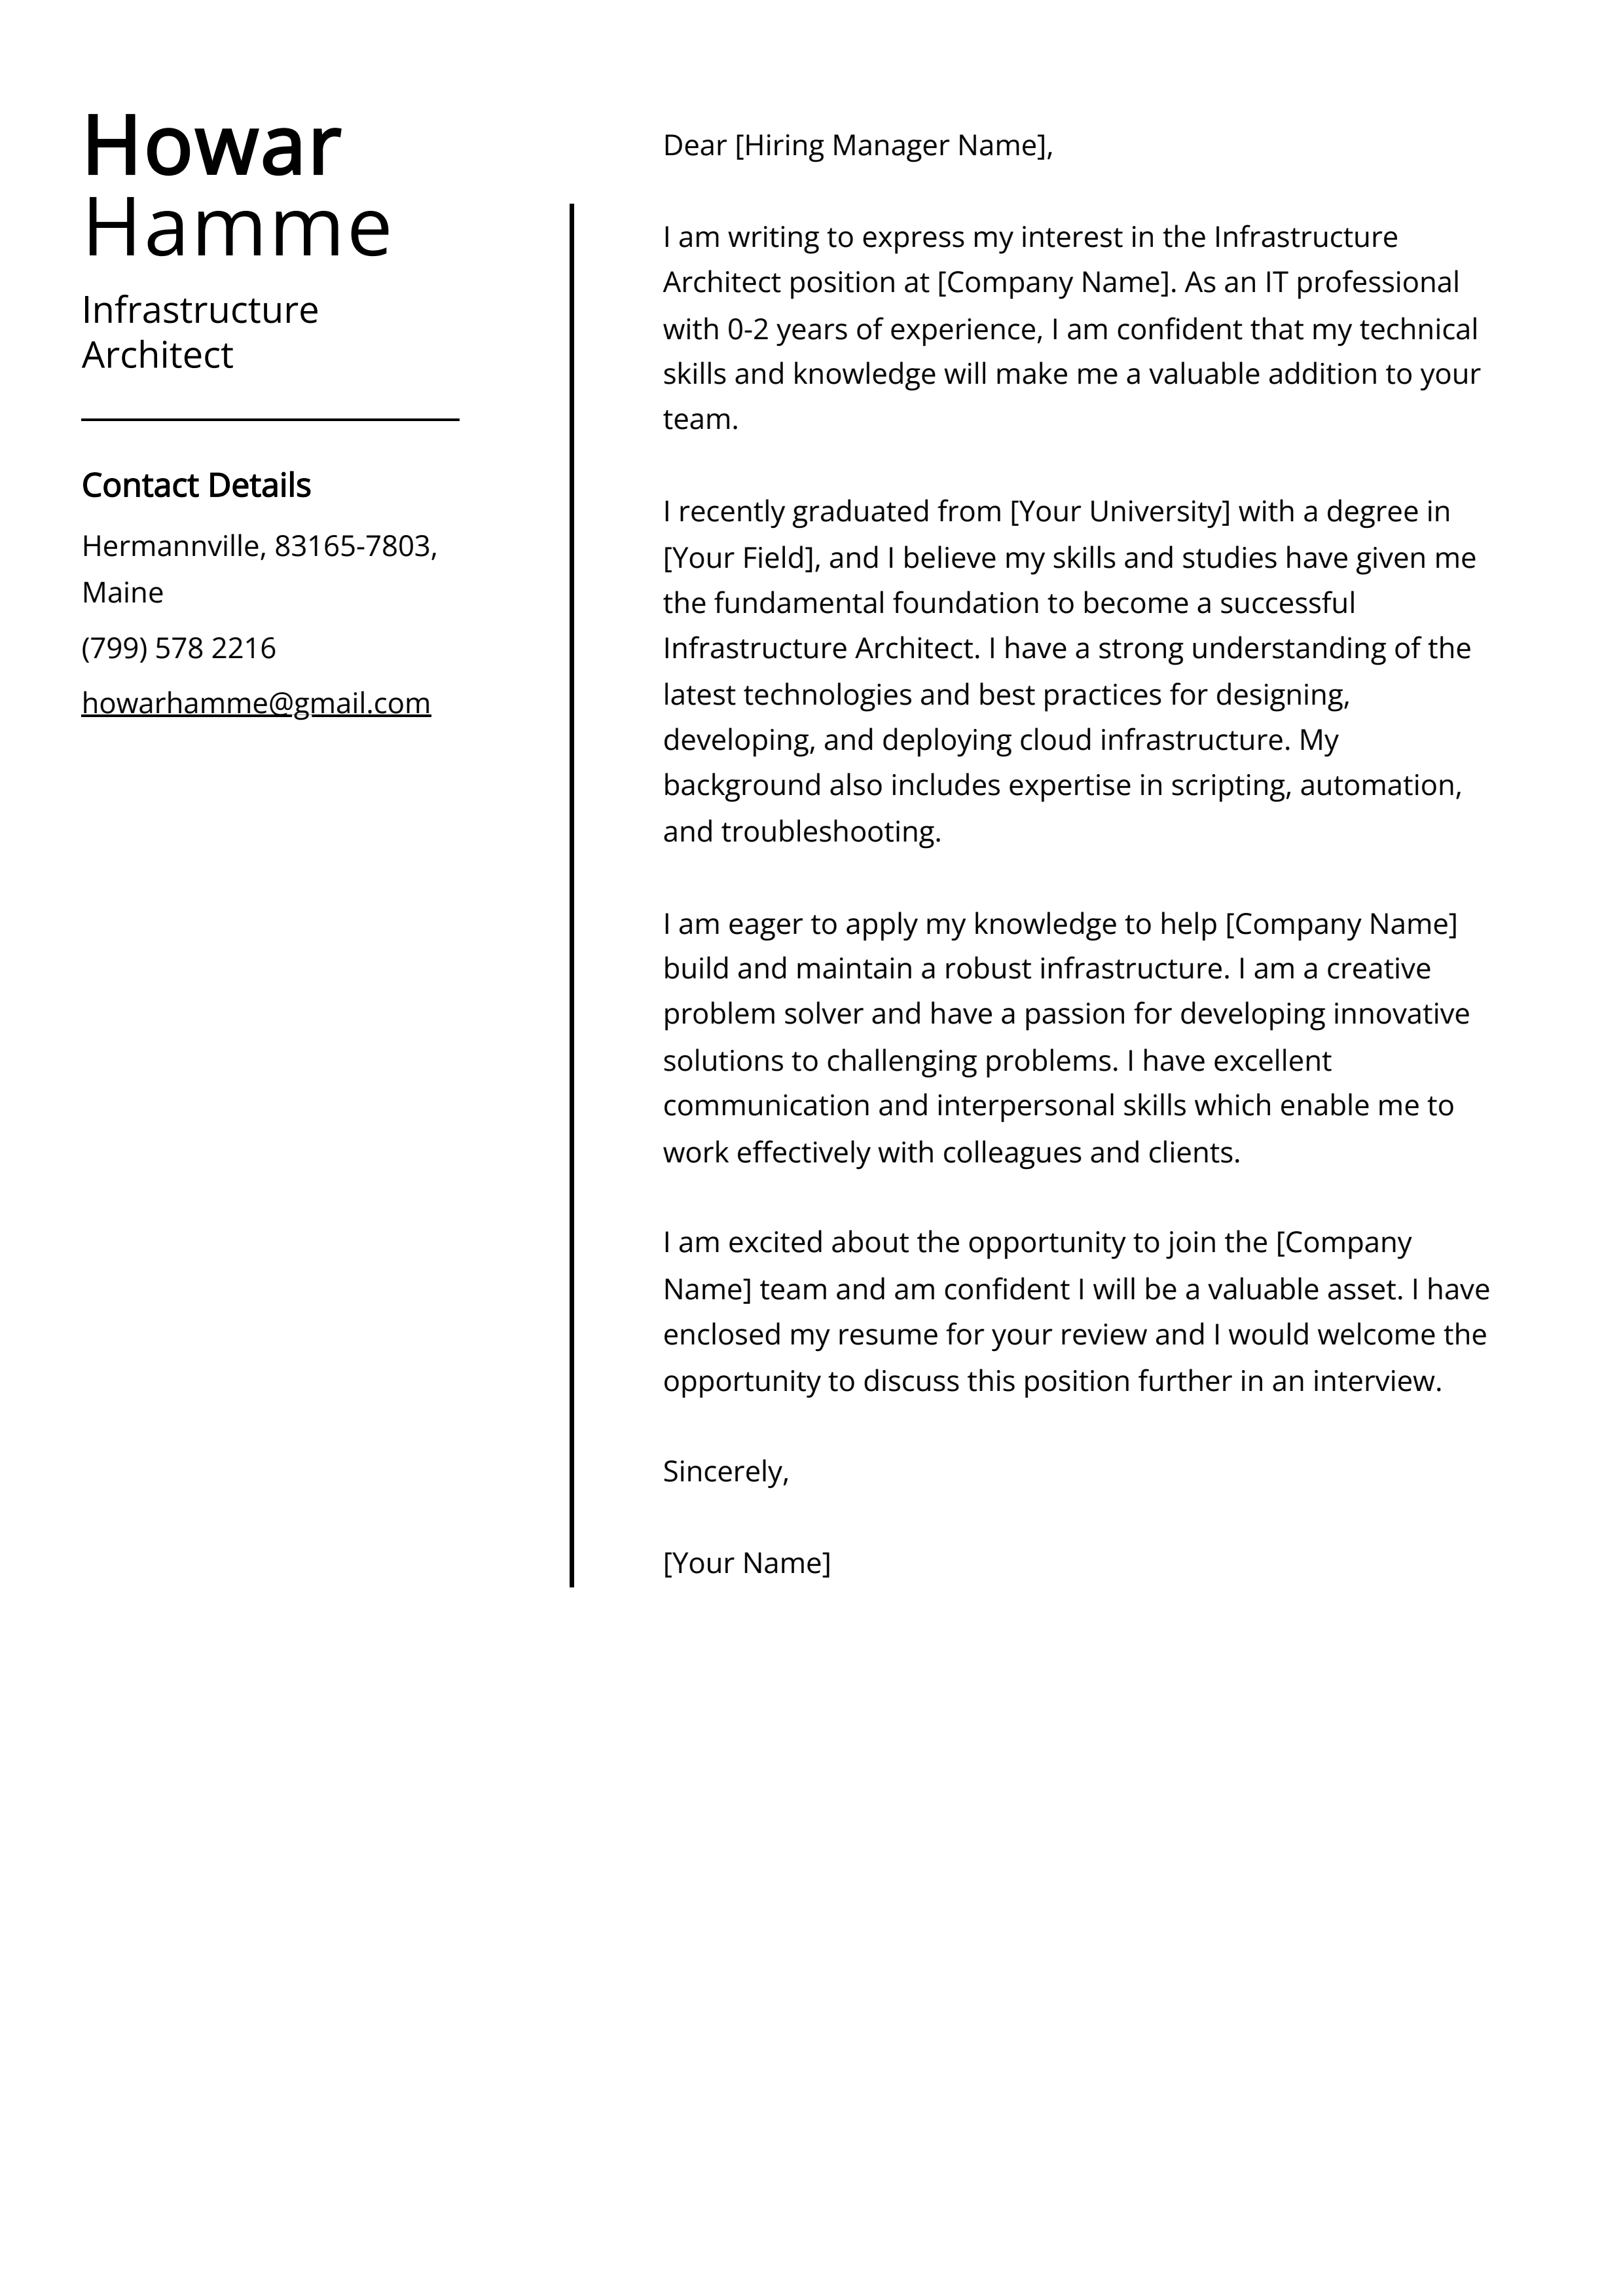 Infrastructure Architect Cover Letter Example